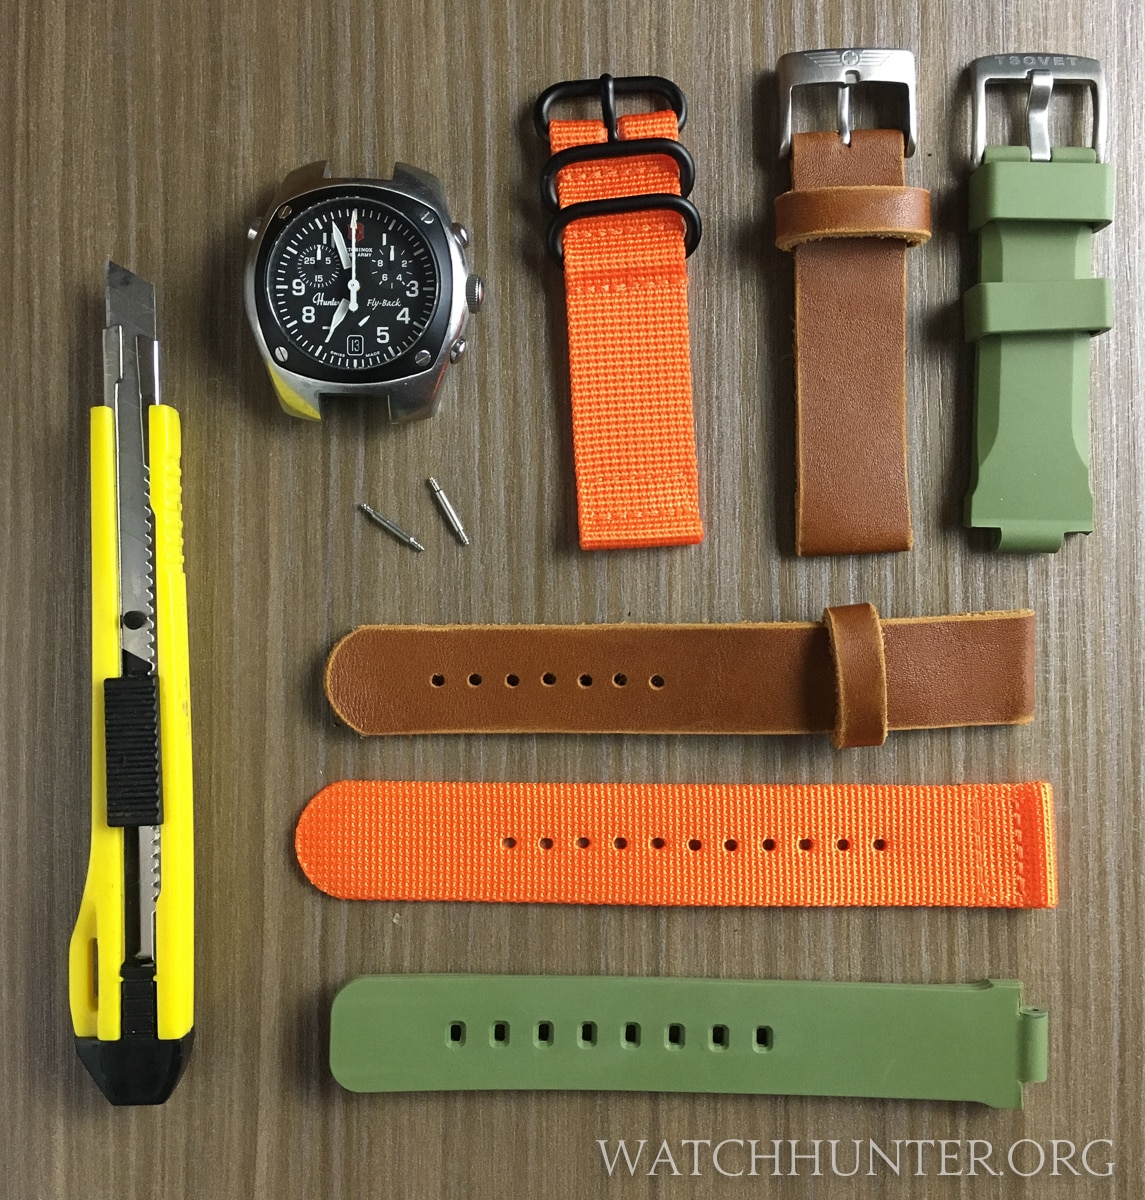 STRAP SWAP: Real World Experiments to Replace Hunter Watch Bands